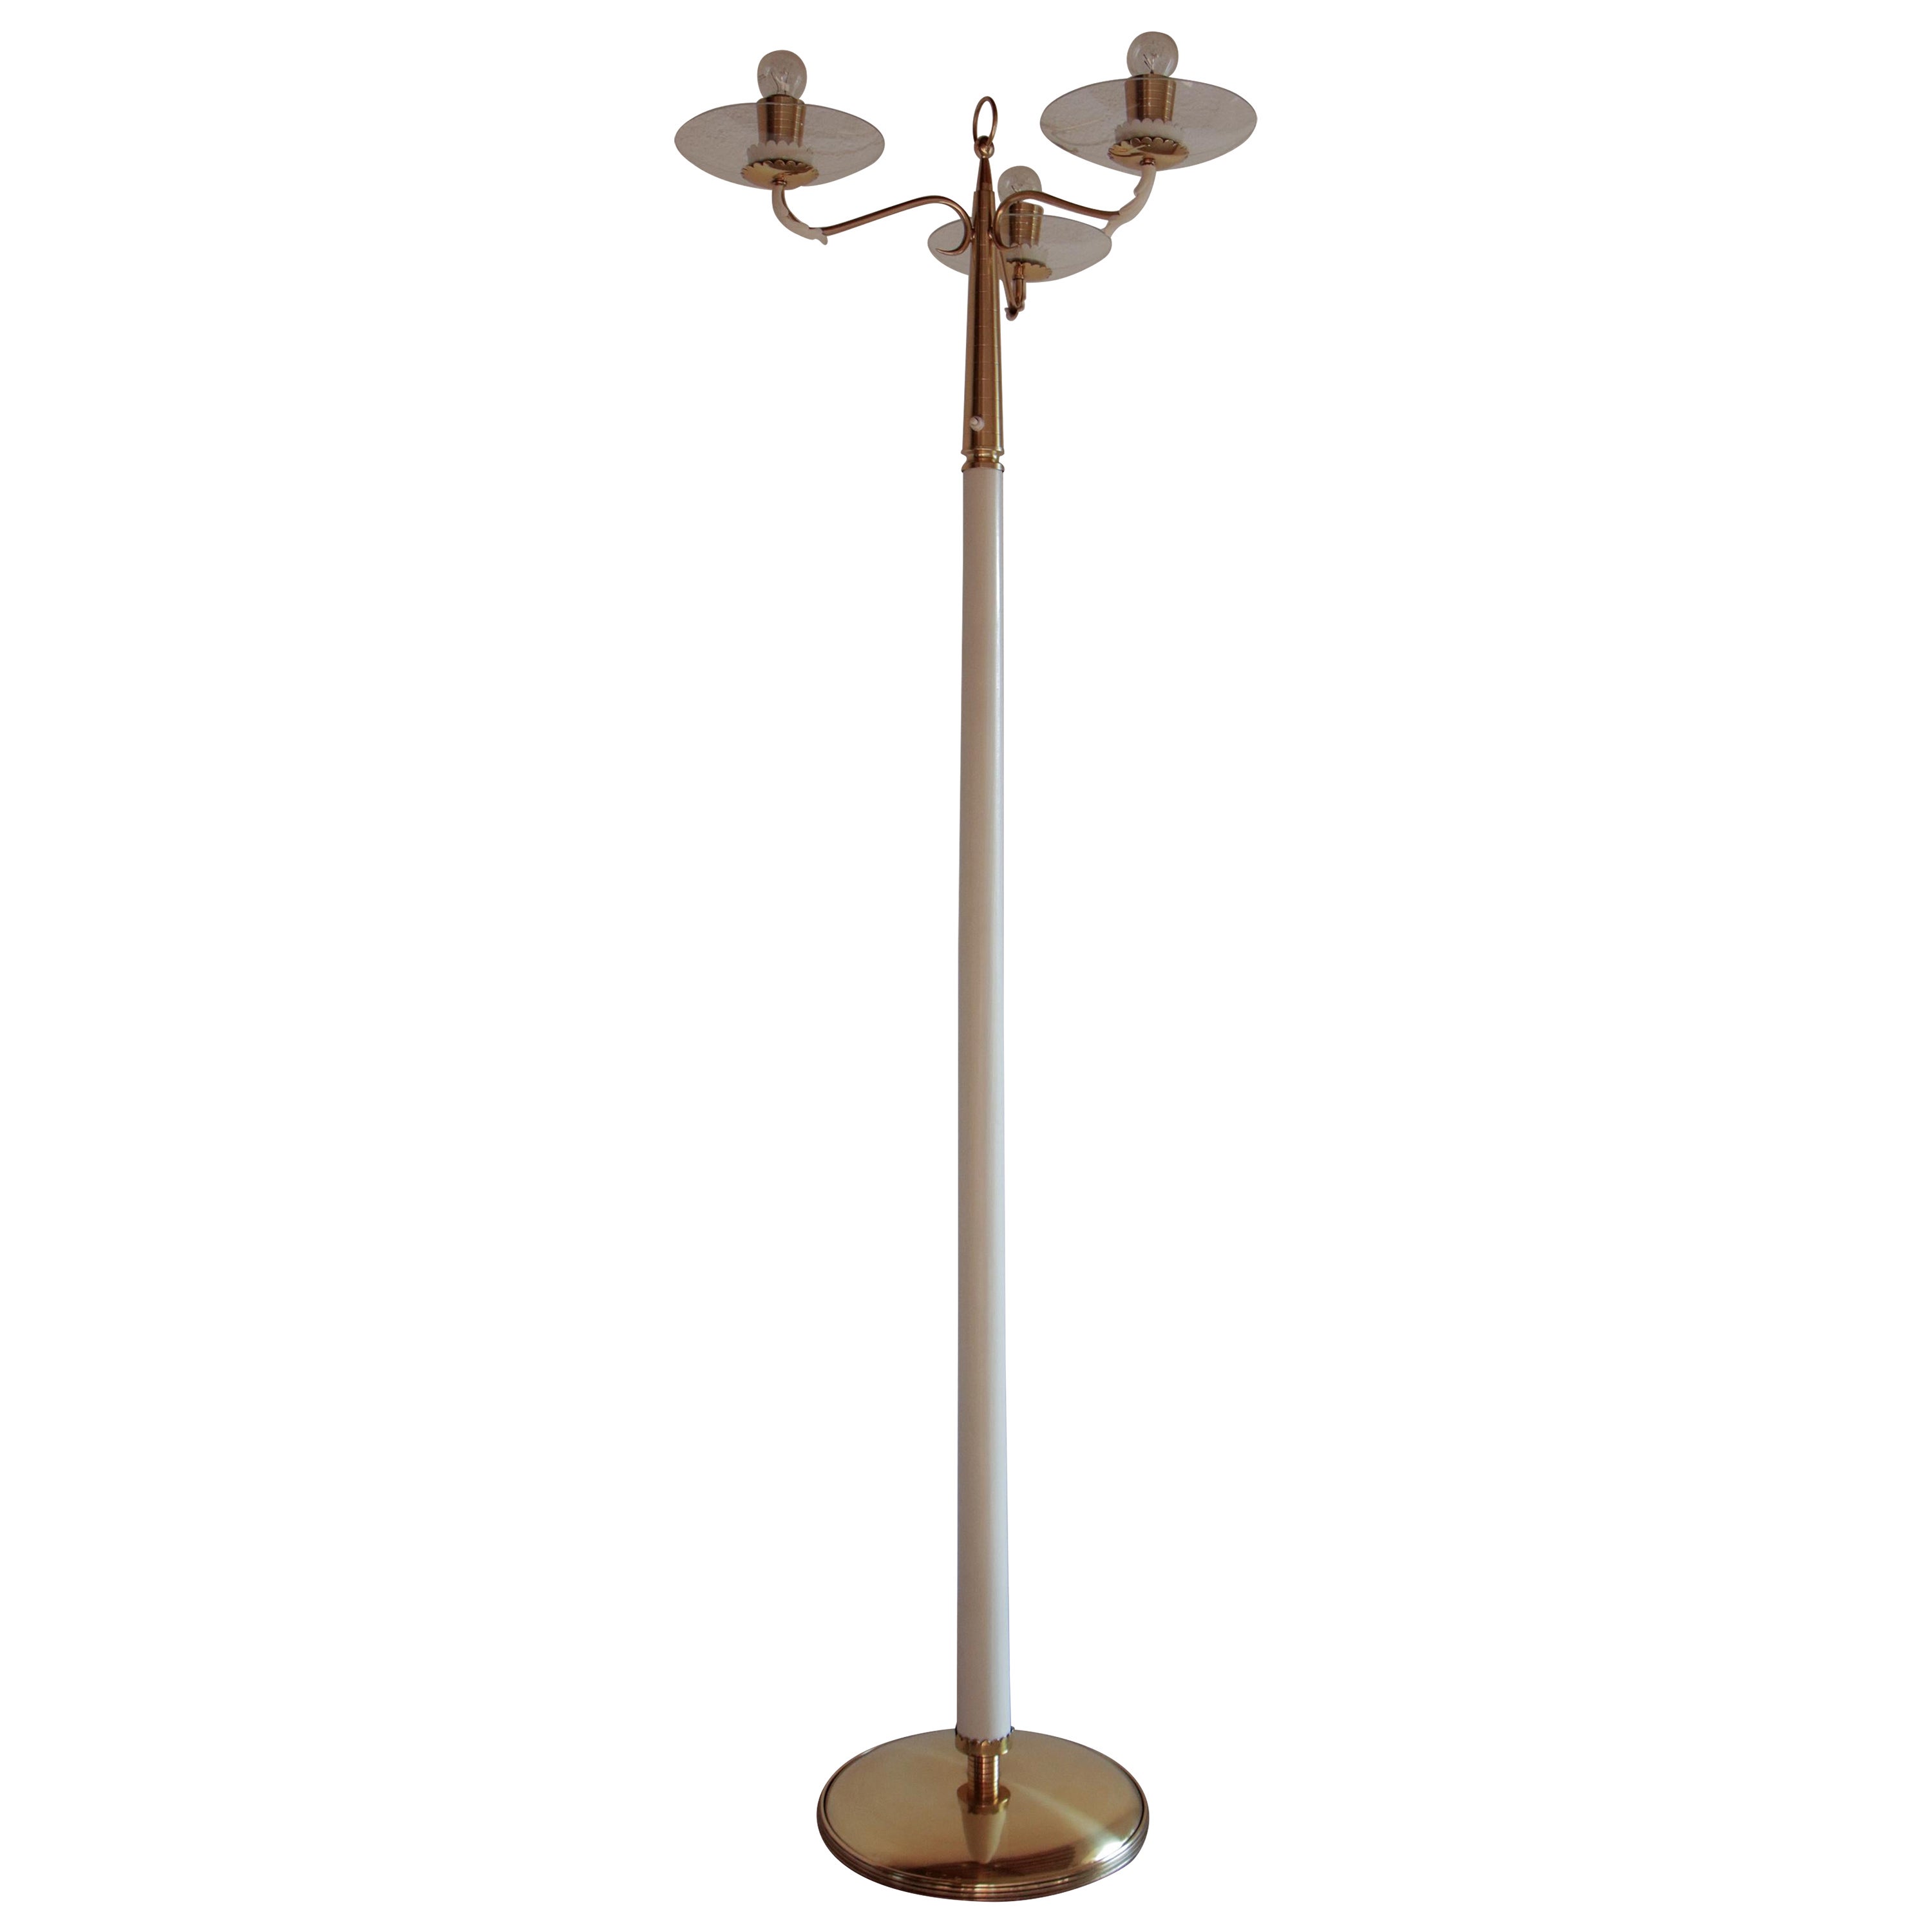 Mid-20th Century Italian  Ash Wood Polished Brass Lamp Floor attributed to Pietro Chiesa  1940s For Sale